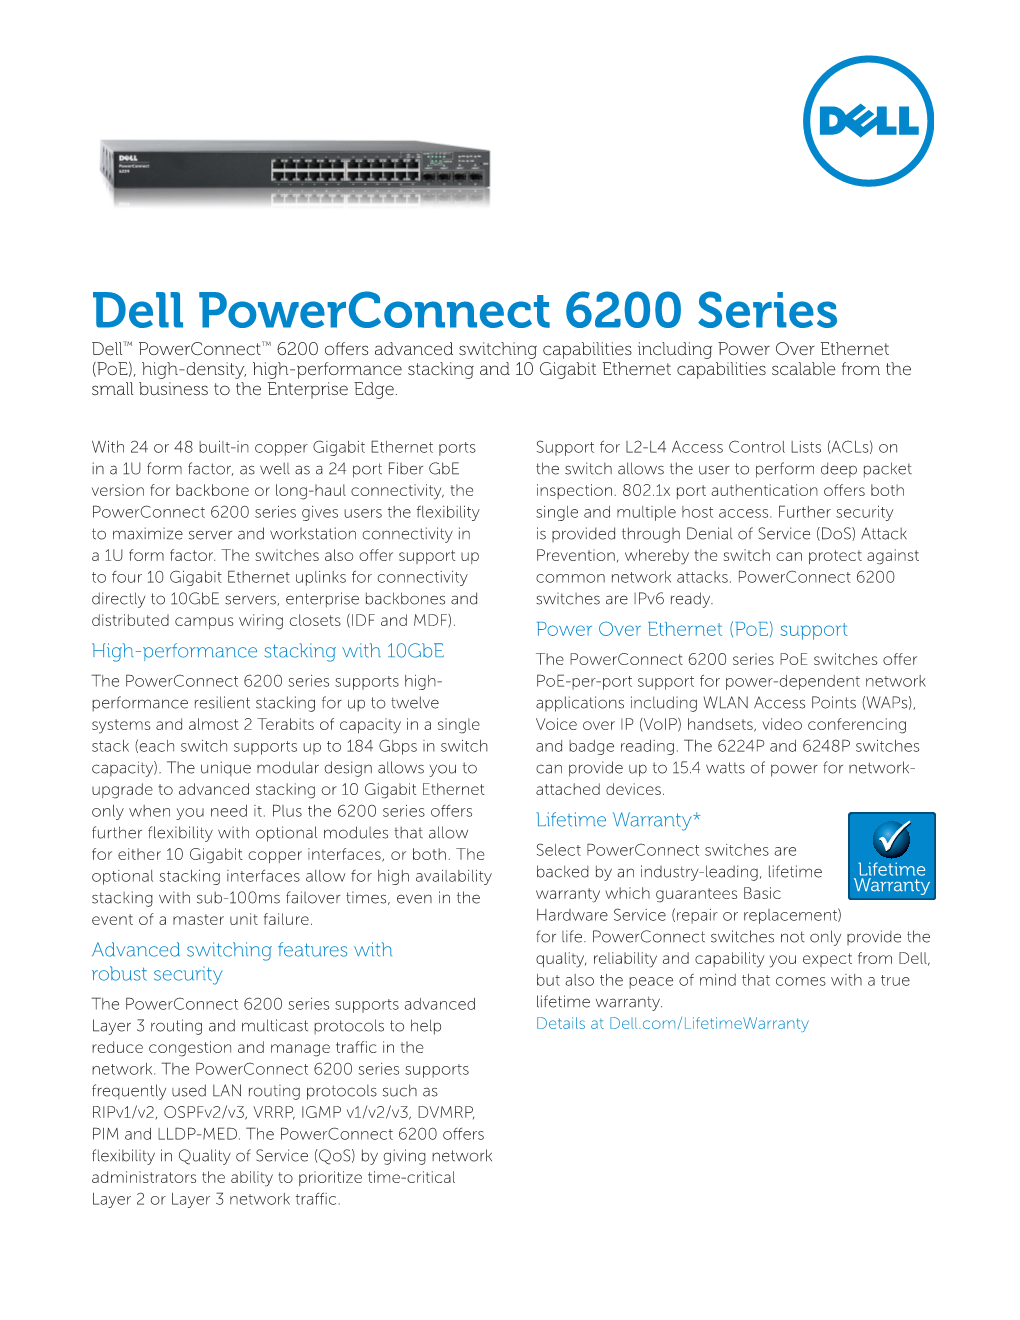 Dell Powerconnect 6200 Series